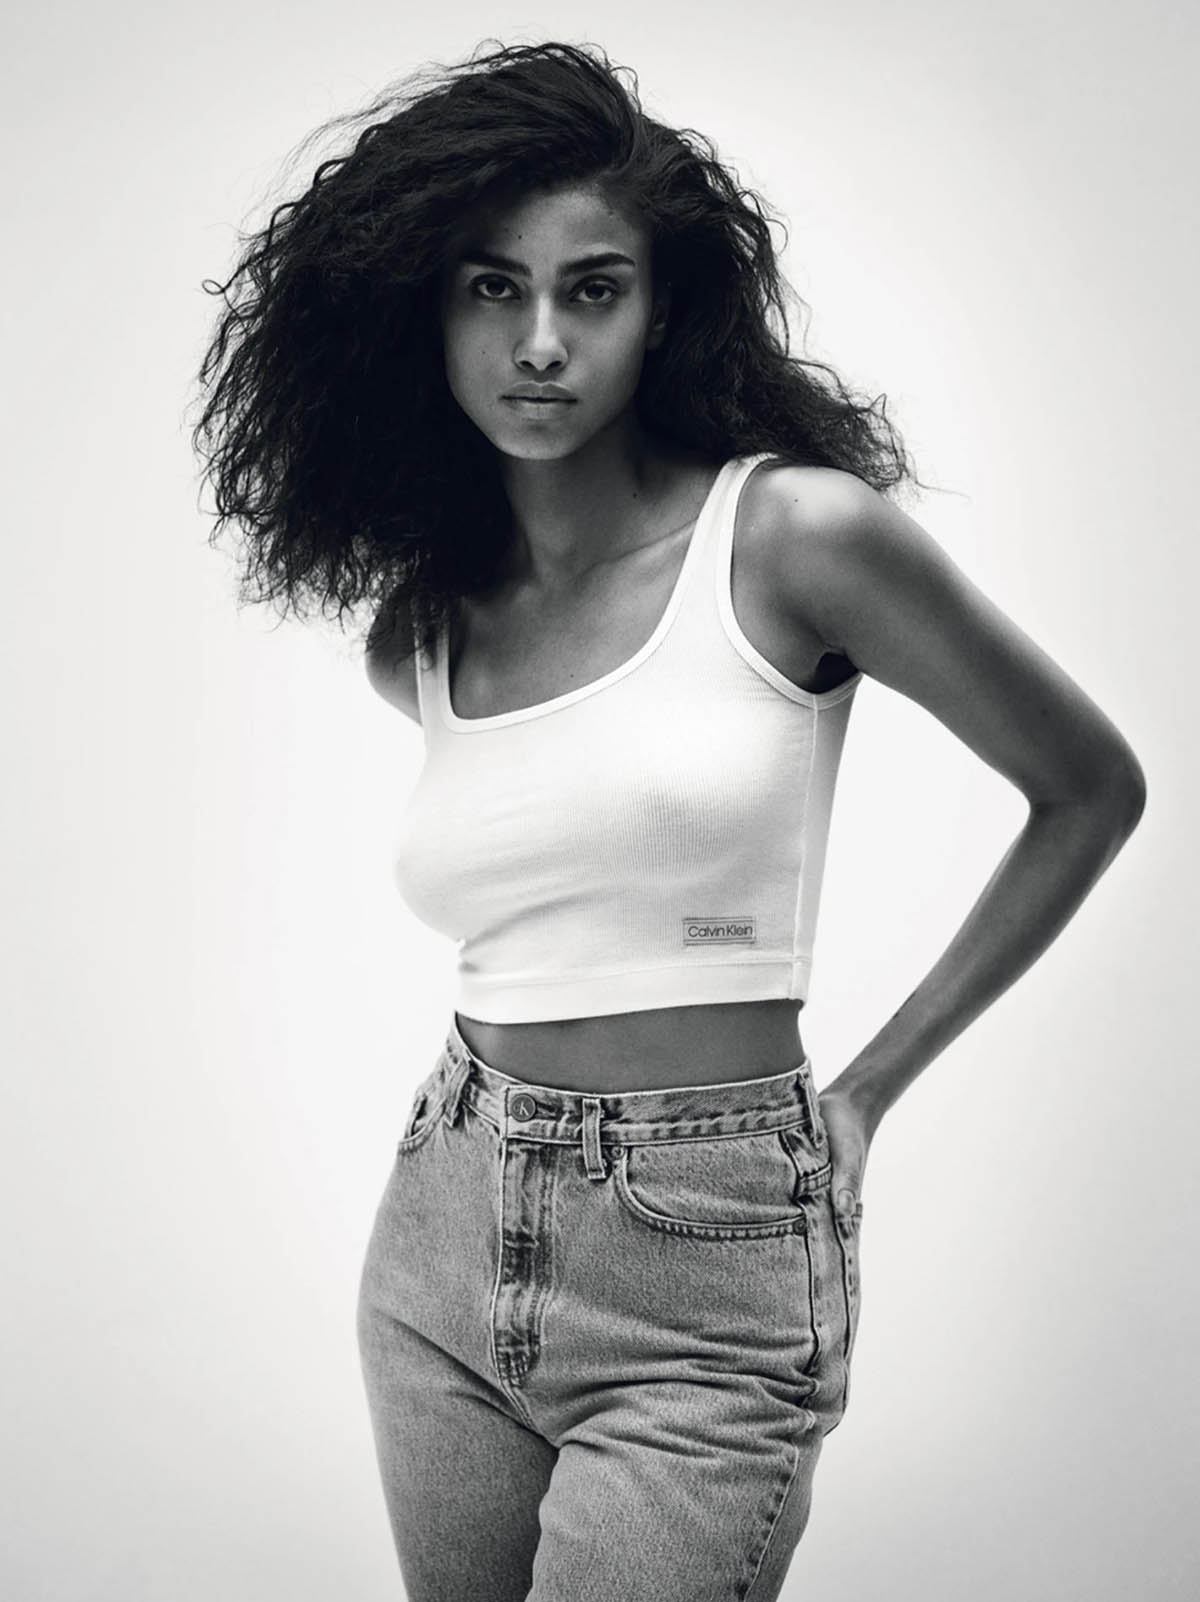 Imaan Hammam covers i-D Magazine Issue 362 by Mario Sorrenti